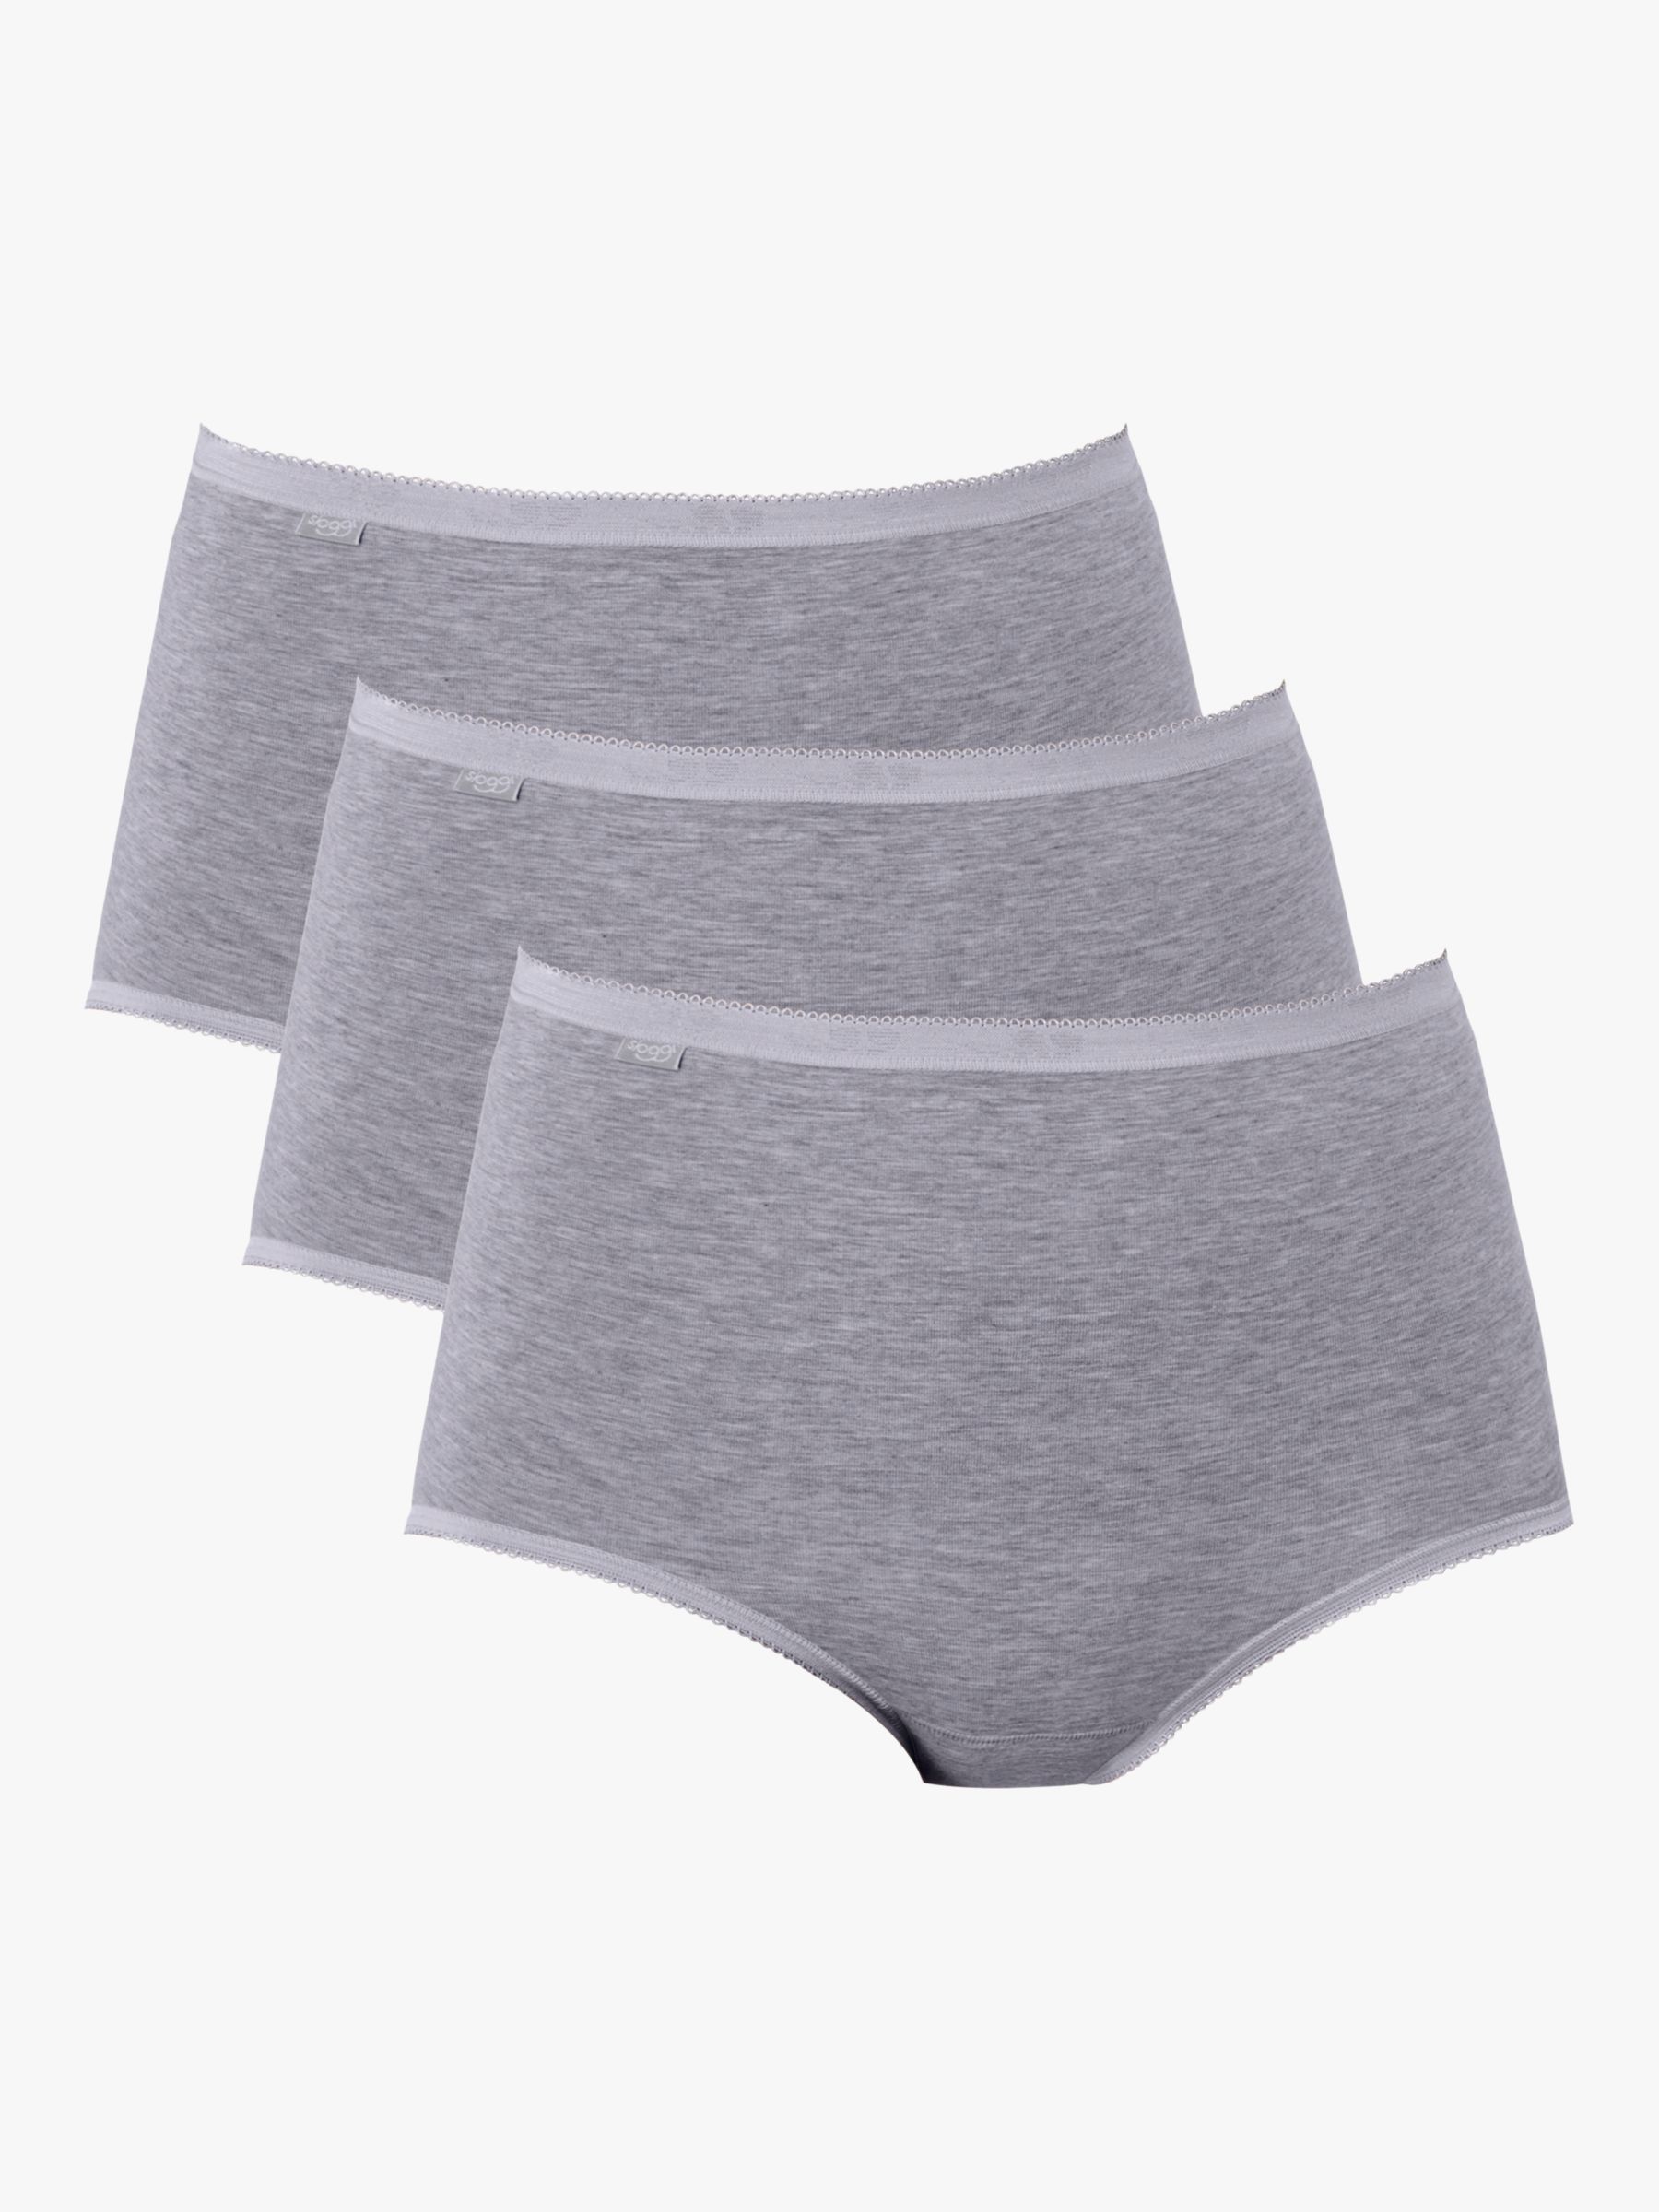 John Lewis ANYDAY No VPL Short Knickers, Pack of 3, Black at John Lewis &  Partners